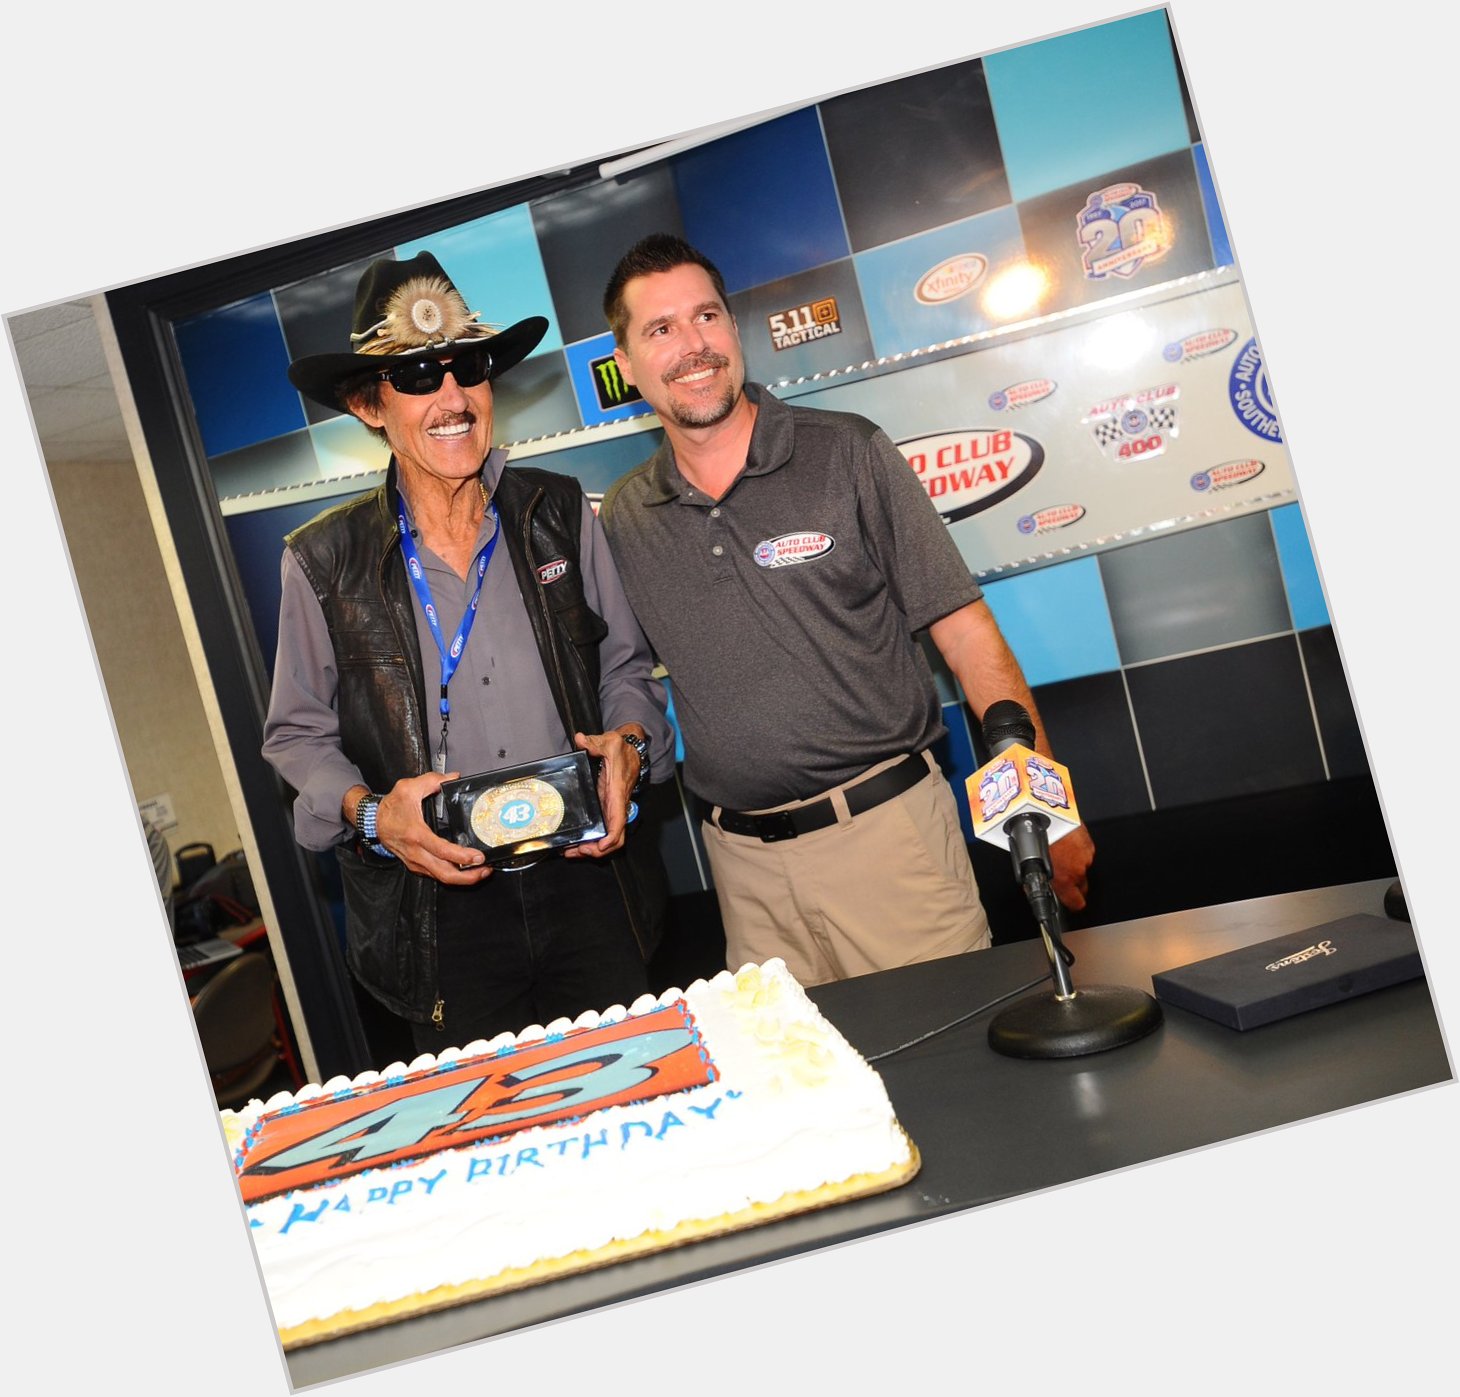 Happy Birthday Richard Petty from your friends at Auto Club Speedway! I  